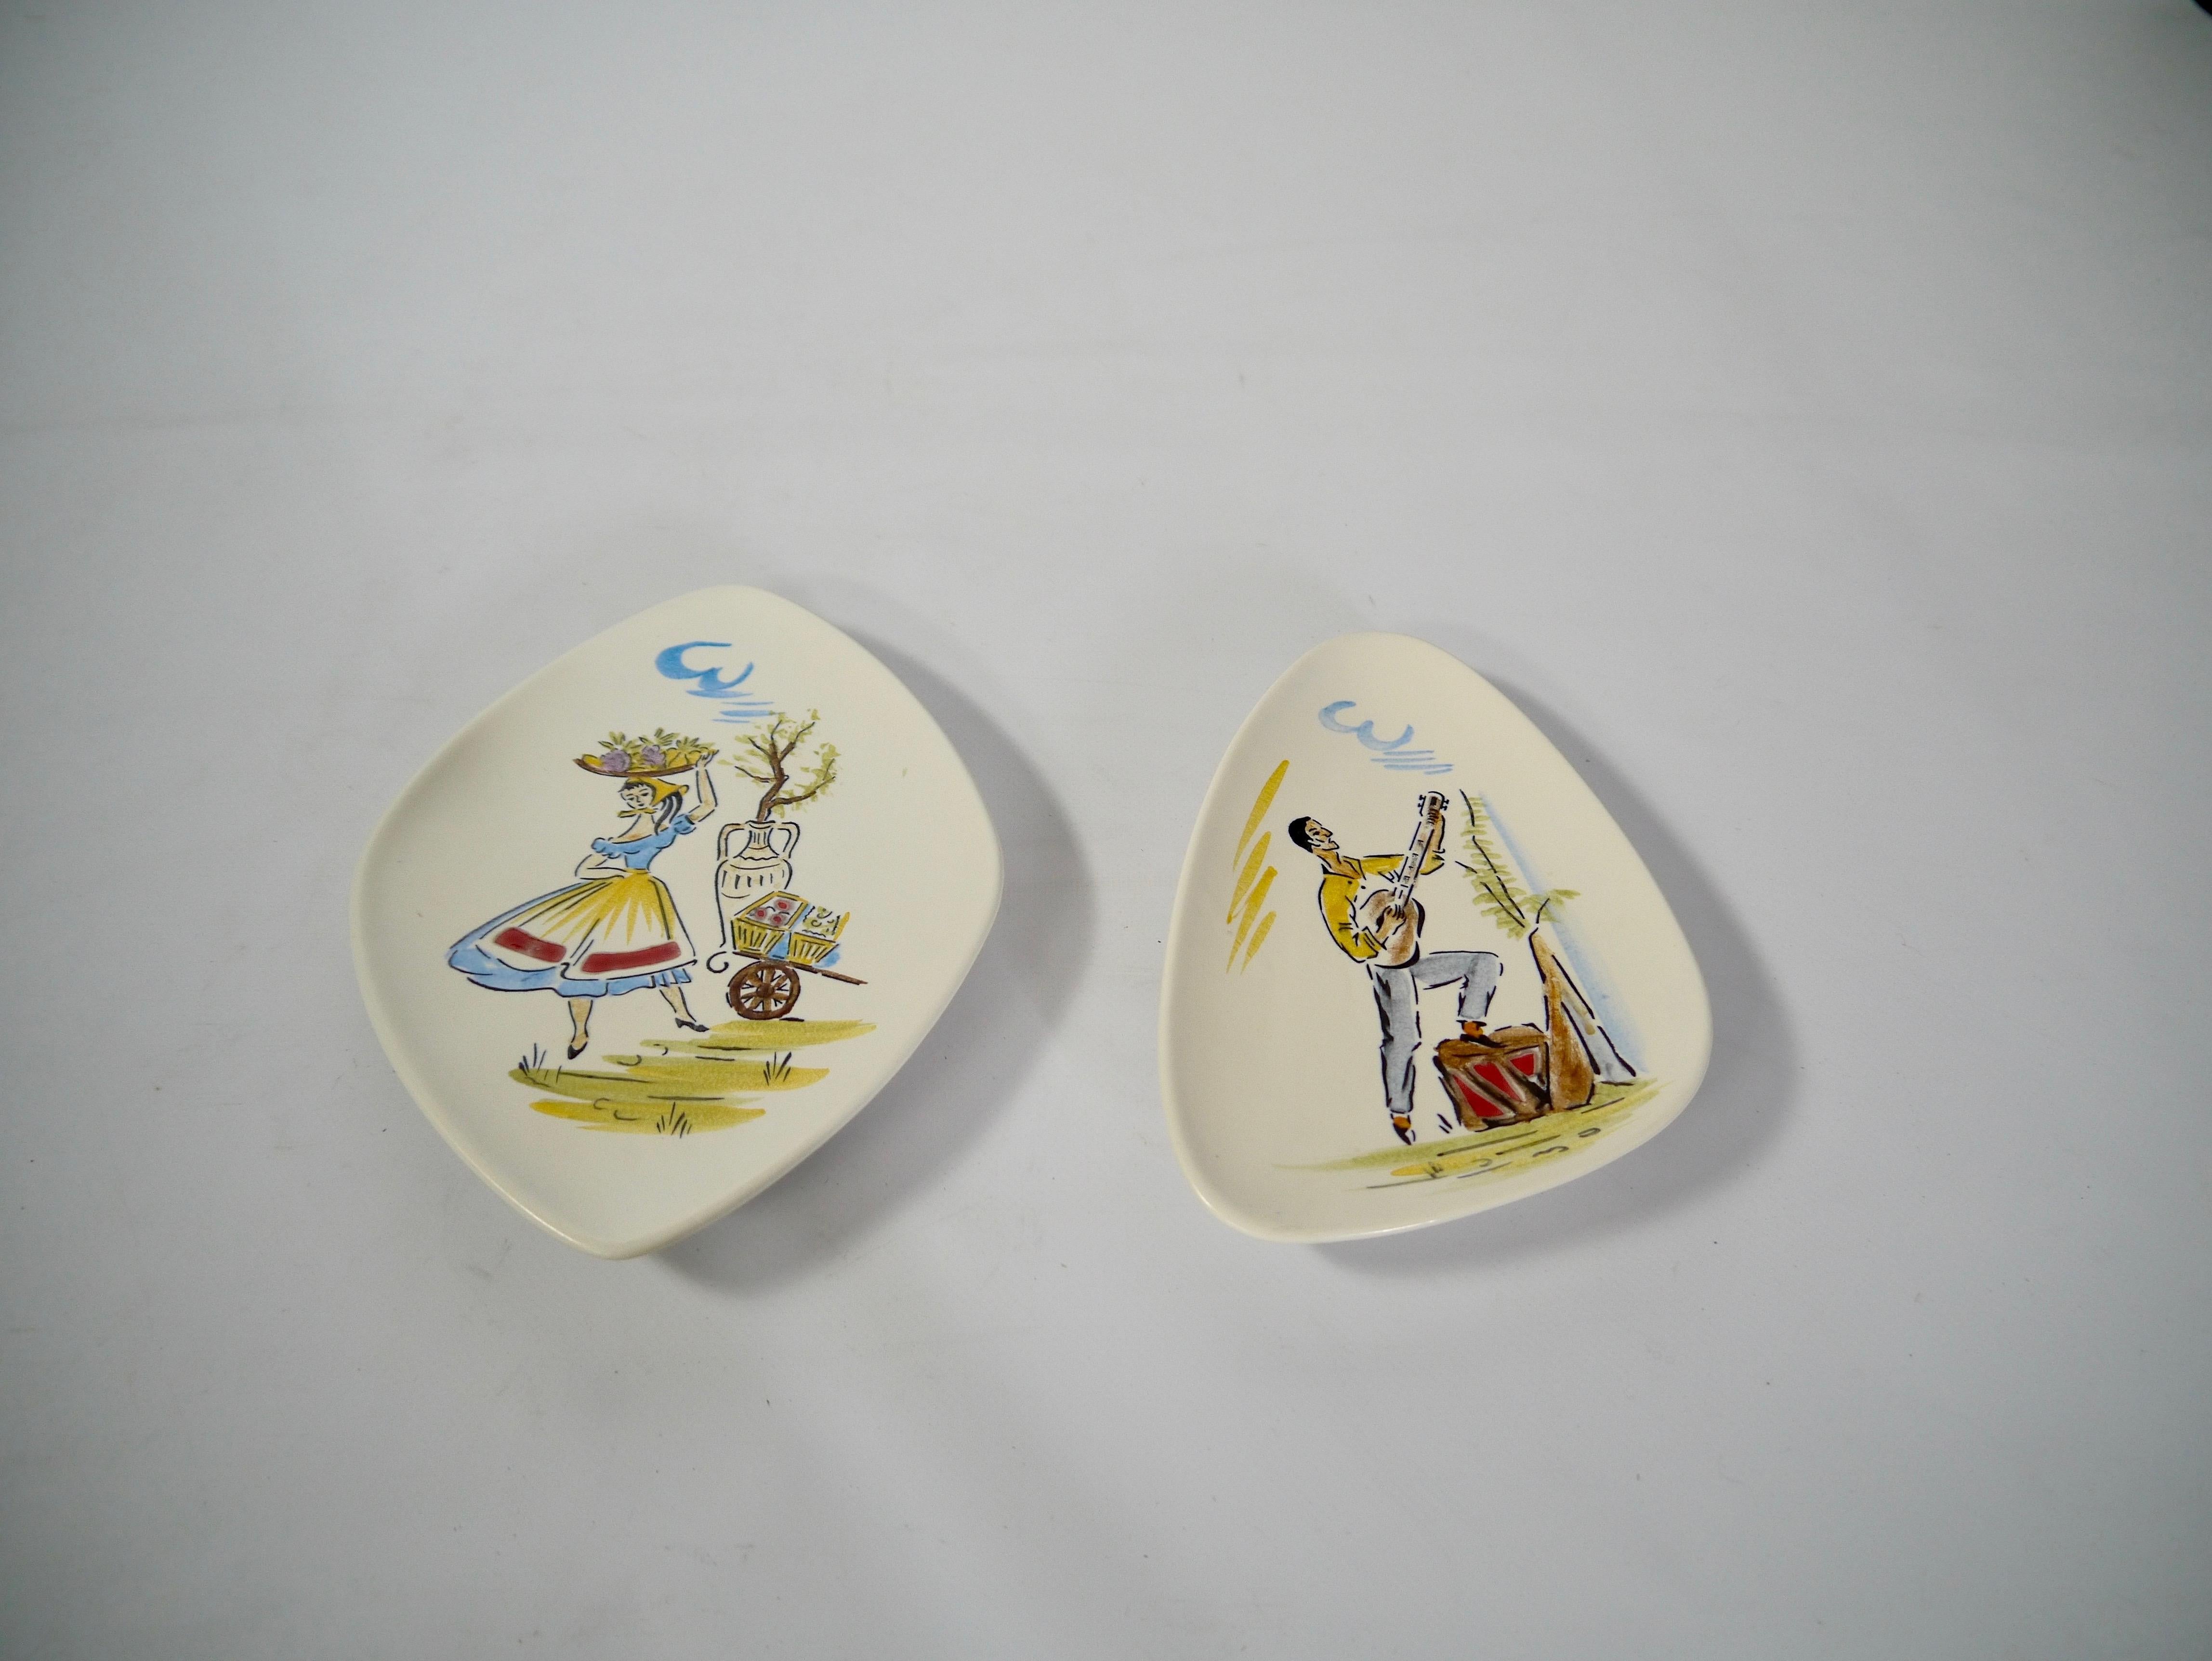 Pair of asymmetric porcelain plates, for putting over table or hung on a wall. Fabricated in West Germany in 1962. Hand-painted kitsch mediterranean mid-century drawing motifs. Marked 268 resp. 270 & Made in West Germany 1962.